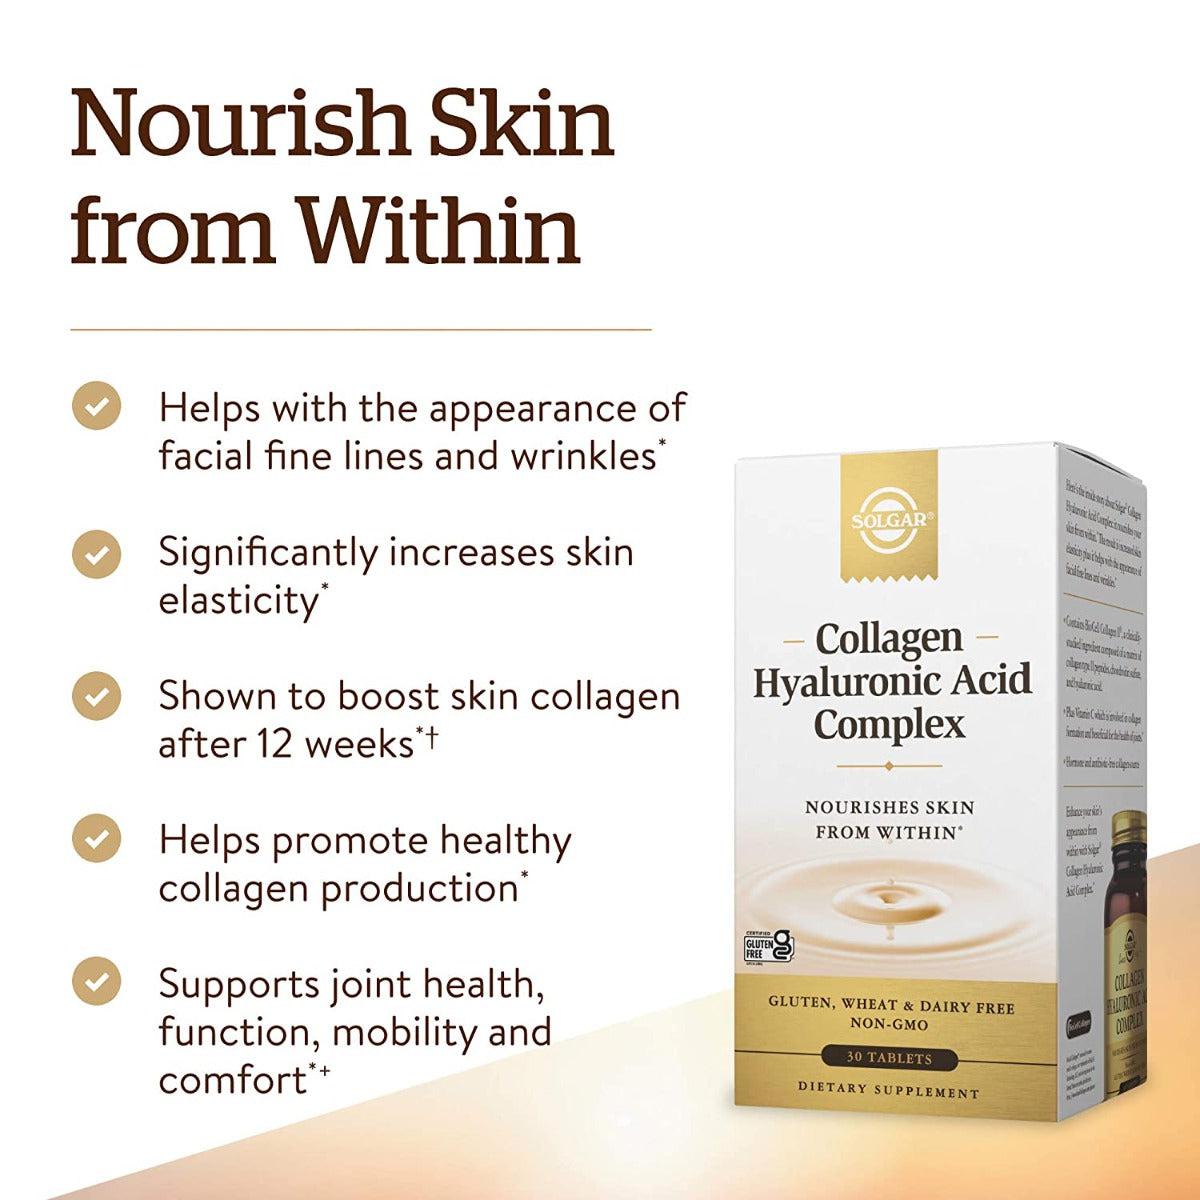 Solgar Collagen Hyaluronic Acid Complex Nourishes Skin From Within Gluten Free Non-GMO 30 Tablets